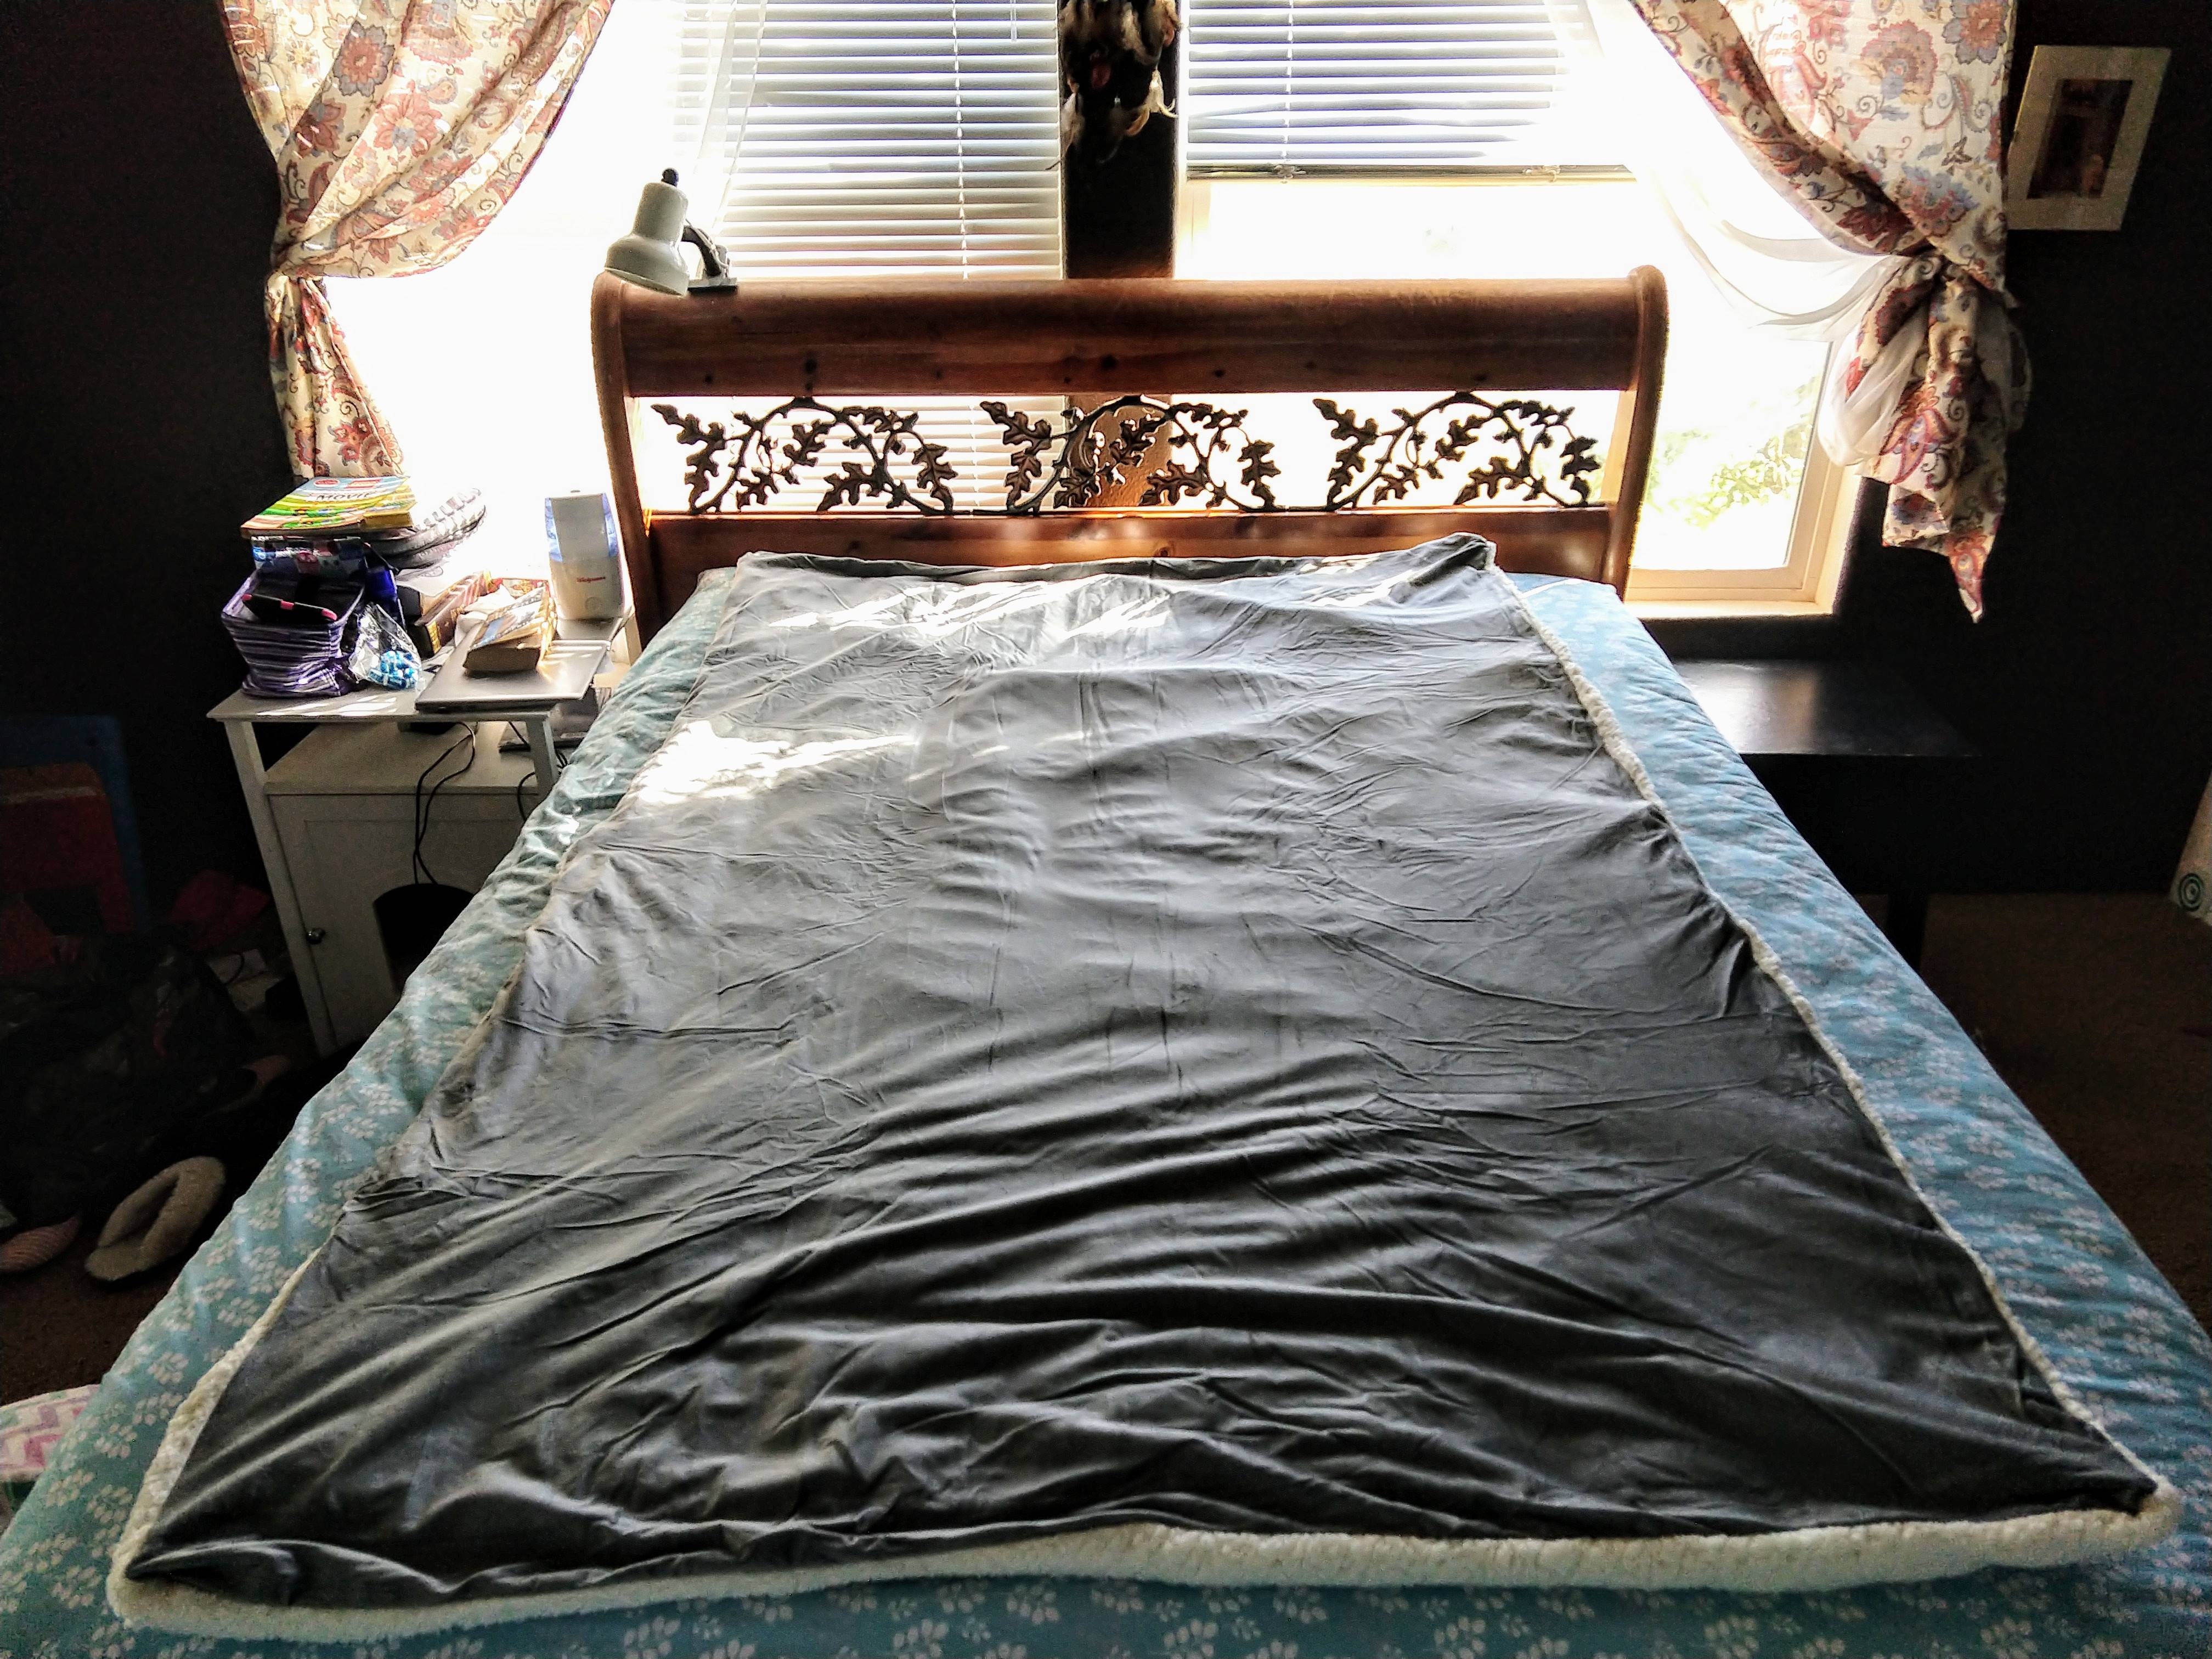 Helix Weighted Blanket Review - The Sleep Judge